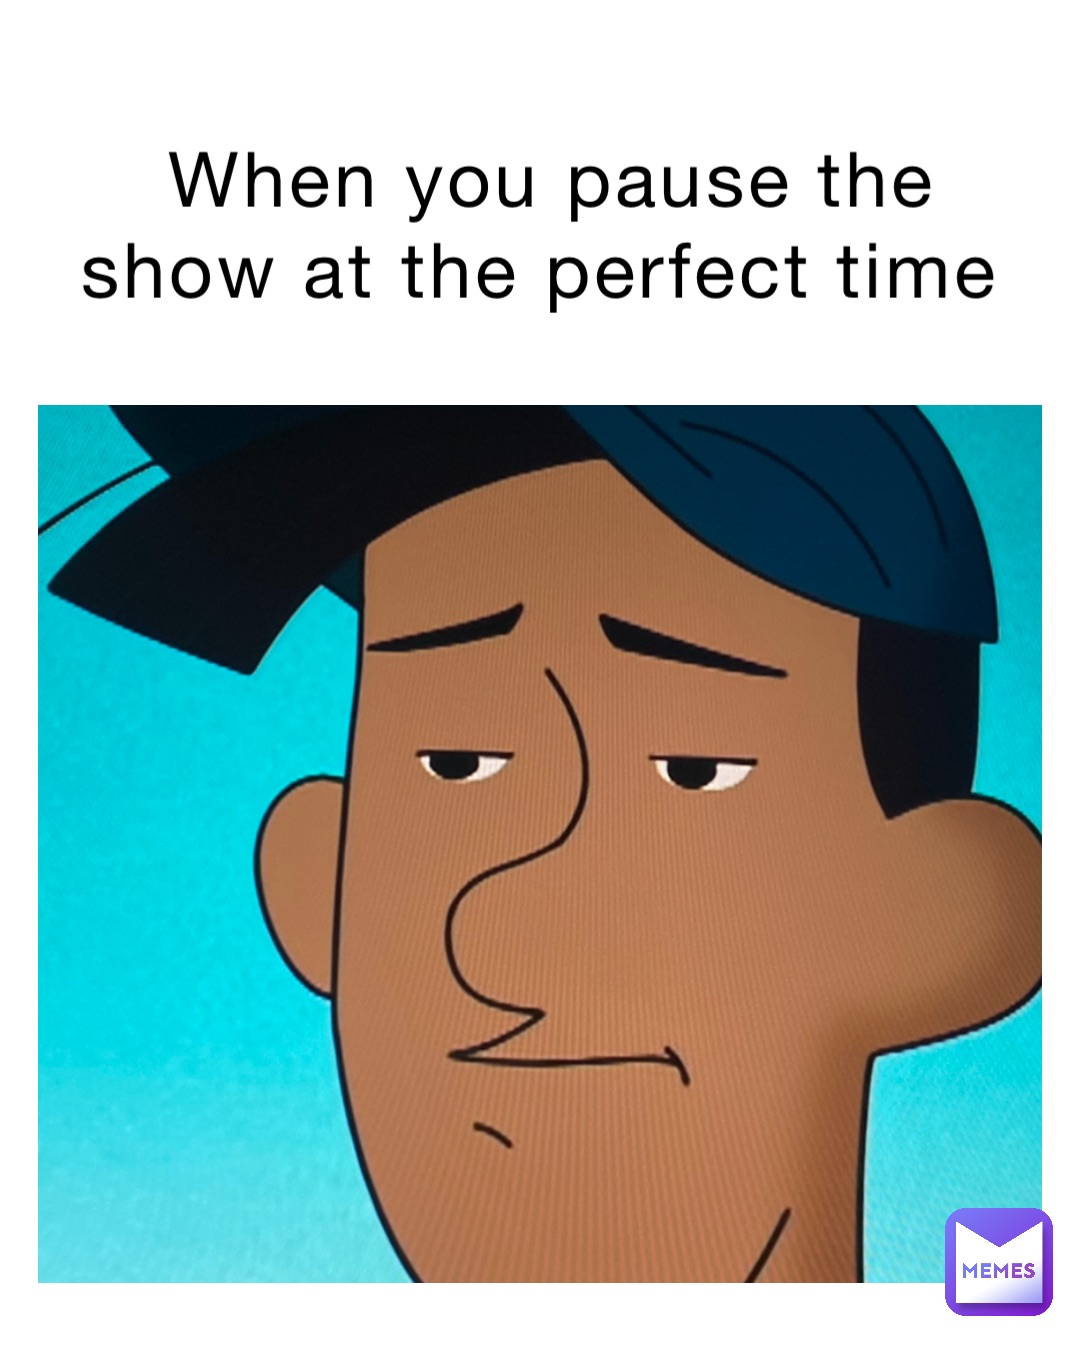 When you pause the show at the perfect time